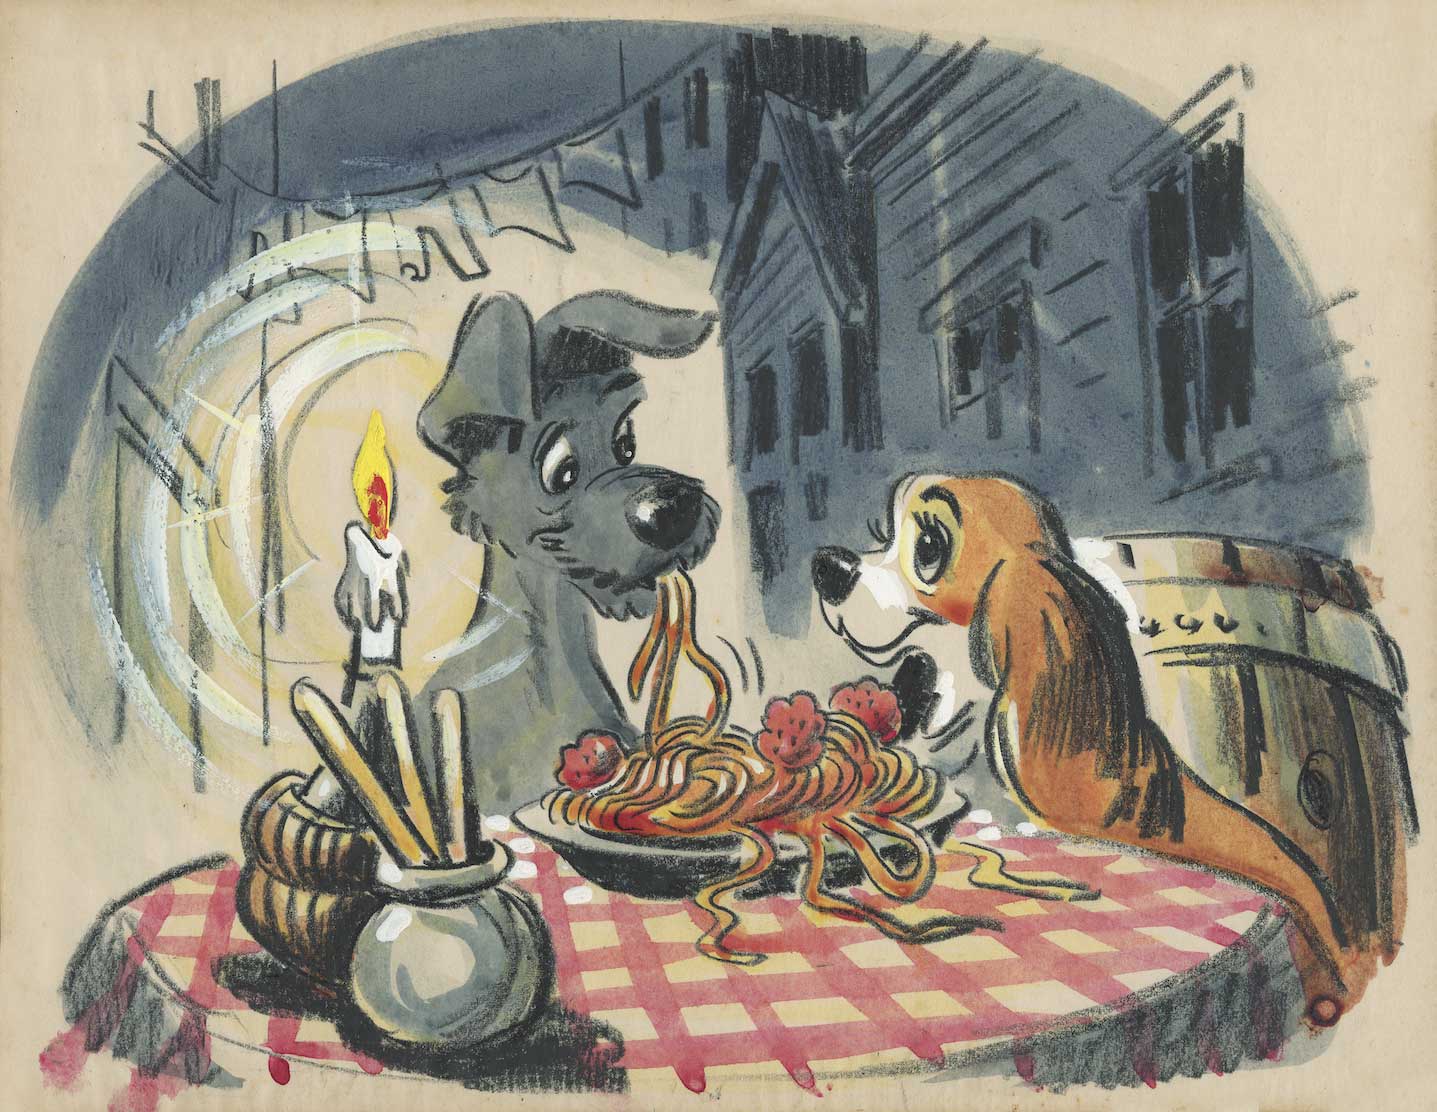 Concept-art-Tramp-and-Lady-in-Lady-and-the-Tramp-1955-Courtesy-of-the-Walt-Disney-Animation-Research-Library-c-Disney.jpg